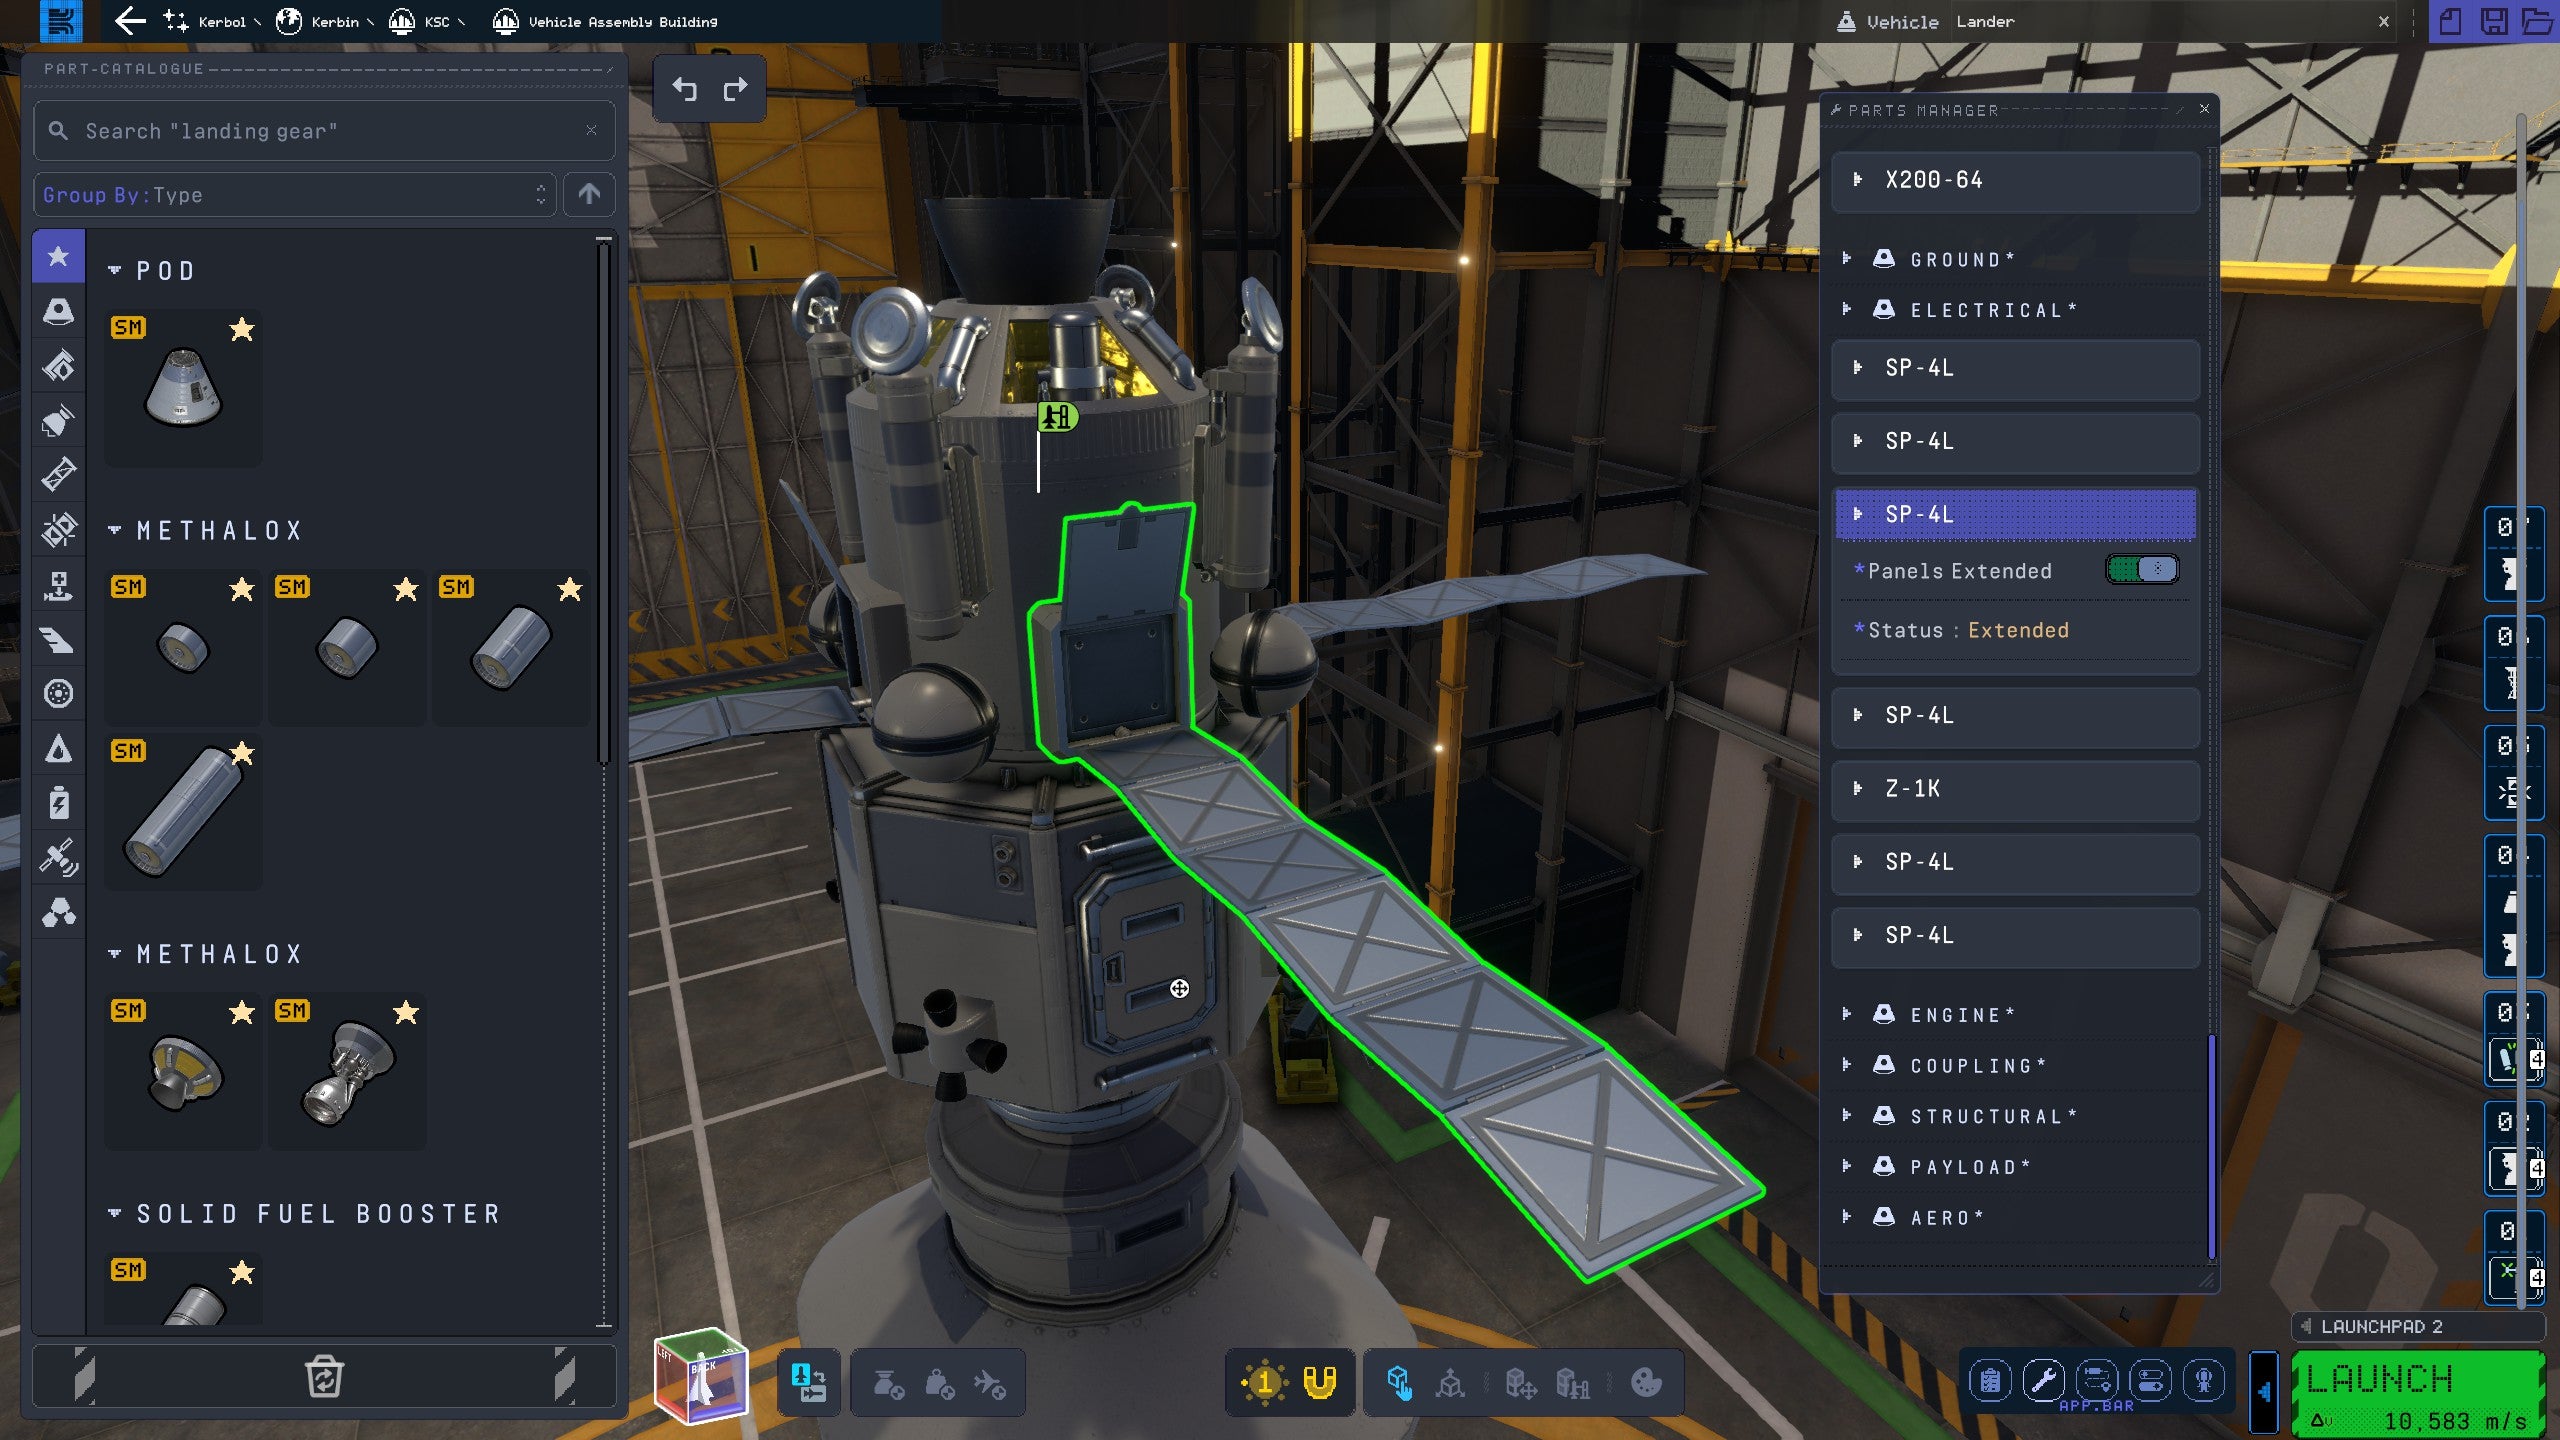 The spaceship piece is added to the shuttle in the workshop in Kerbal Space Program 2